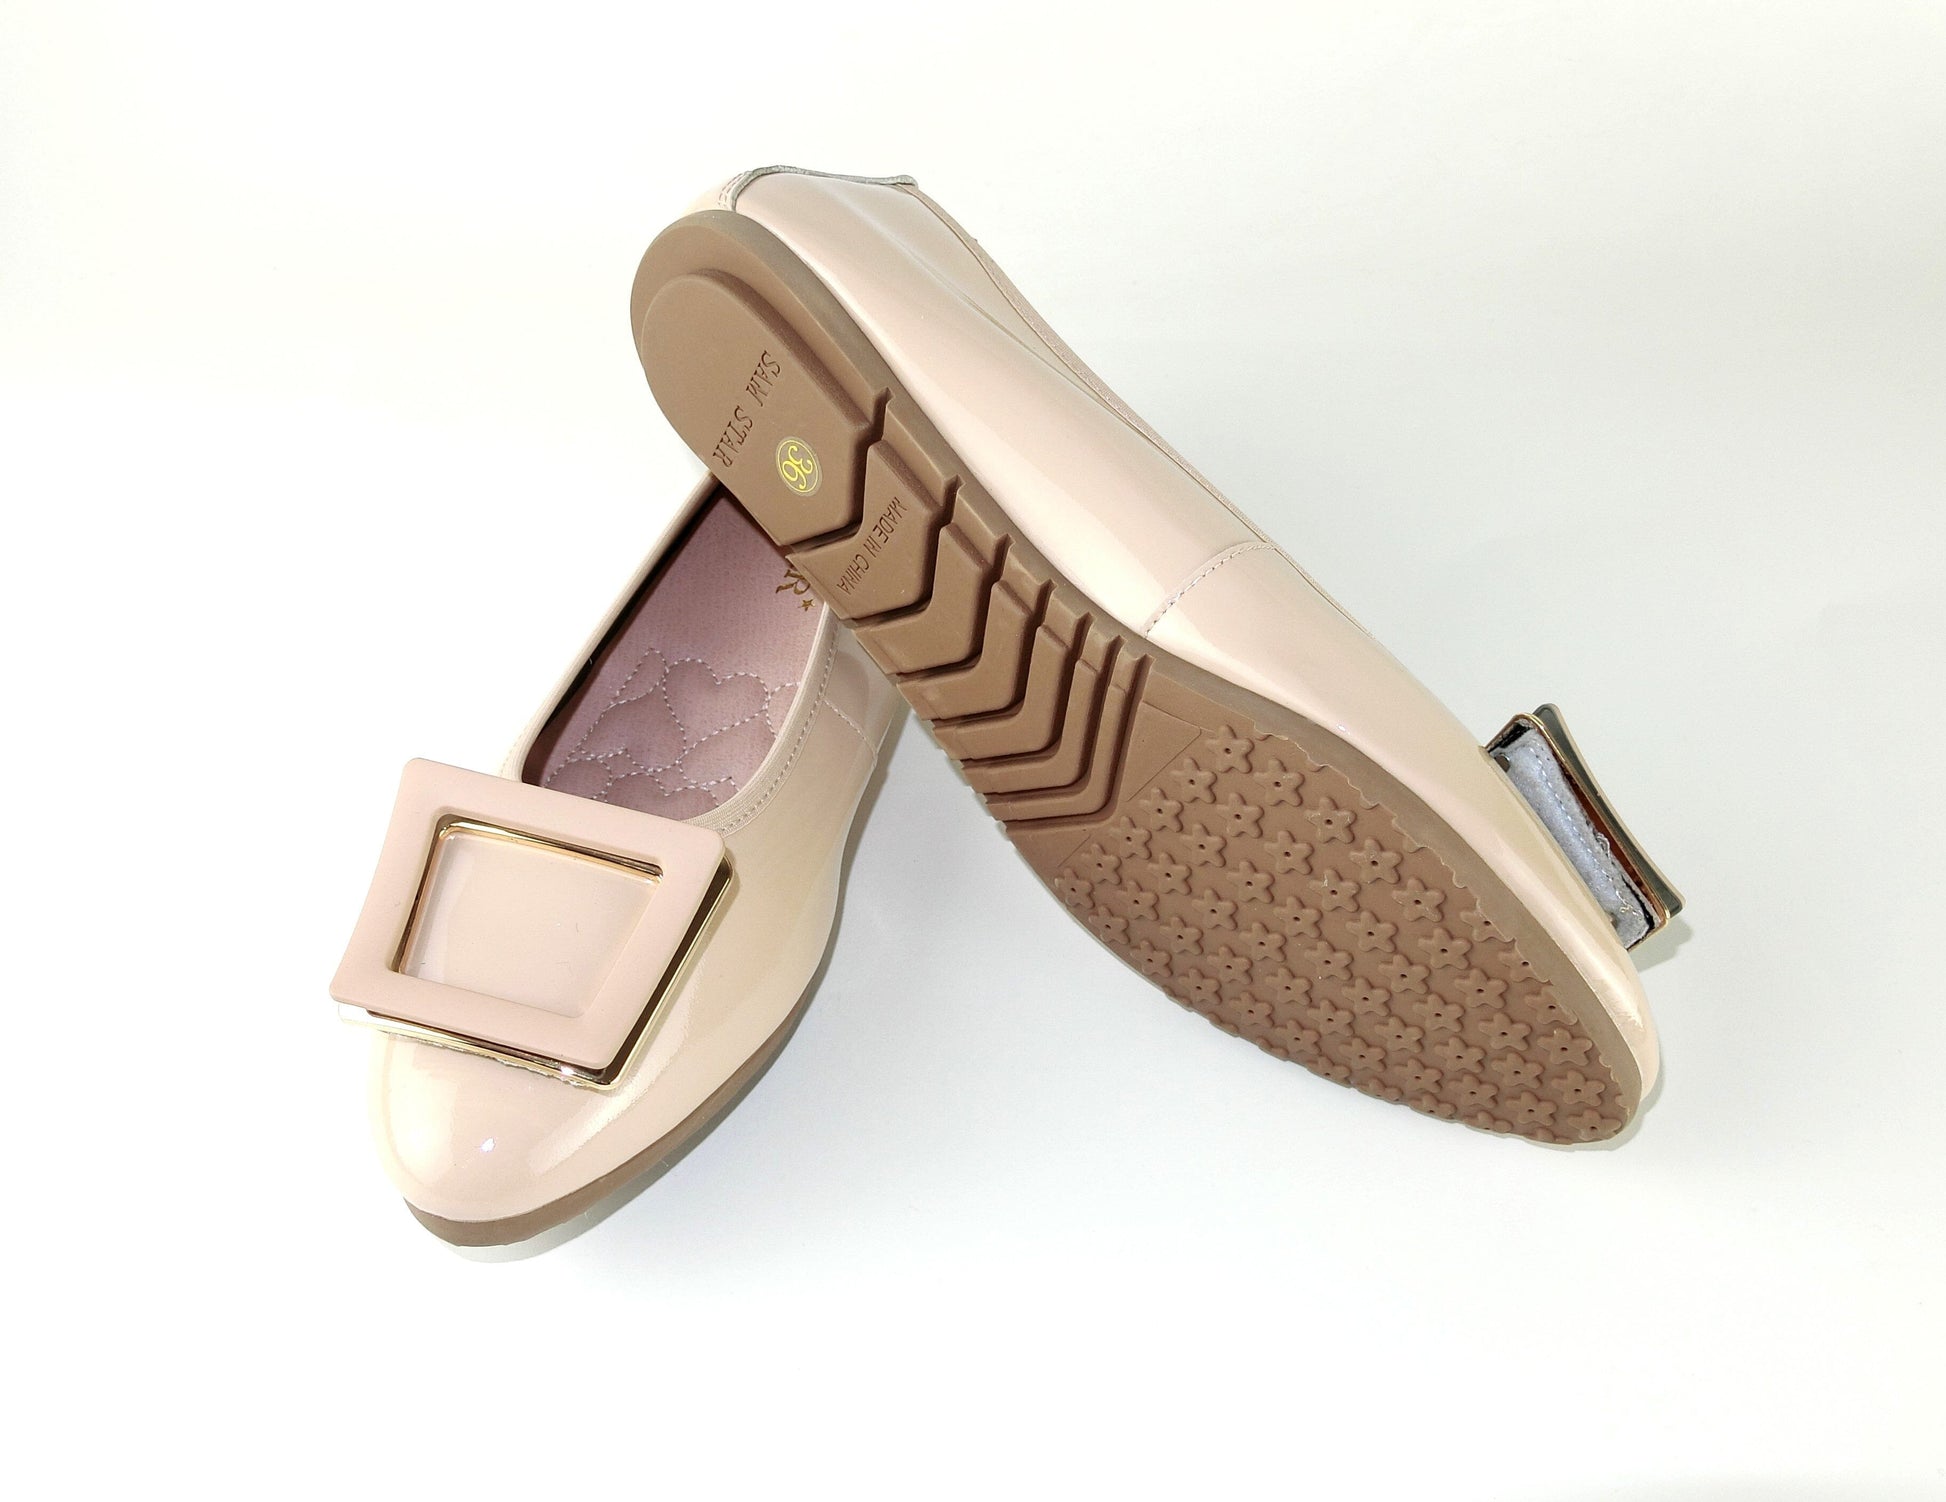 12W01 Leather Pointy buckle pumps with extra cushions (New) Pumps Sam Star Shoes Beige 37 (4) 